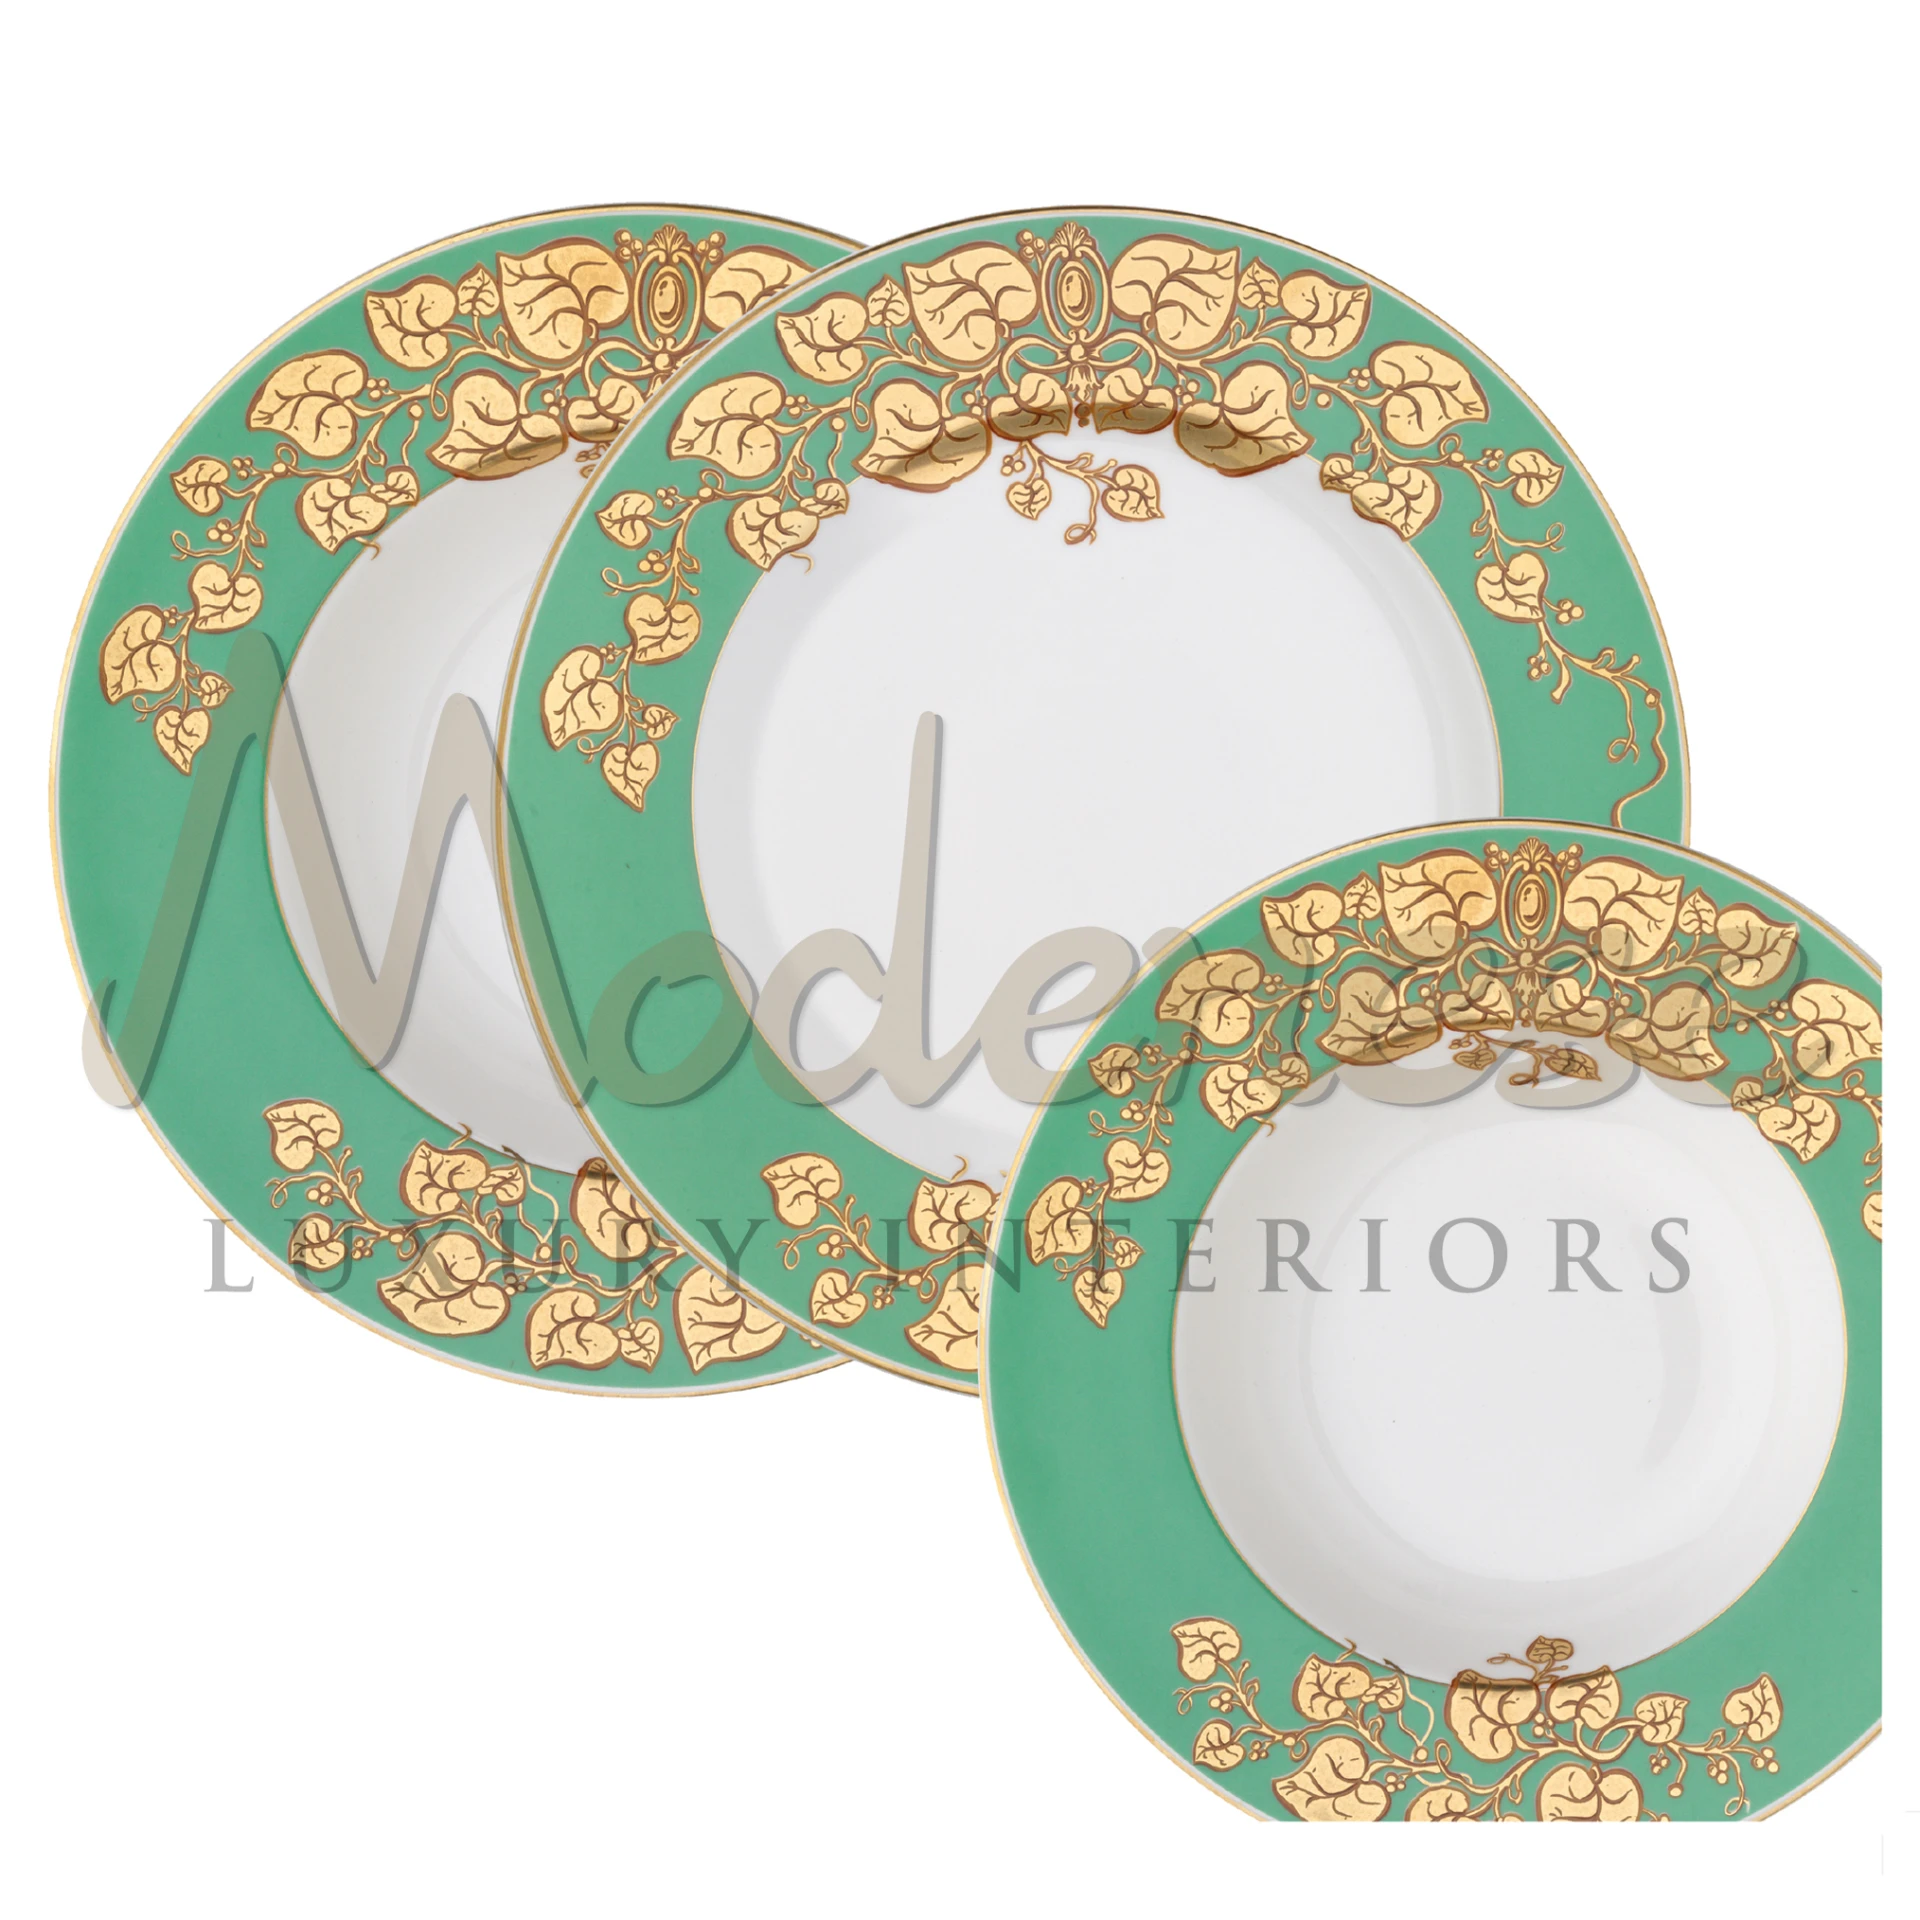 Three decorative plates with green borders and sophisticated golden designs.